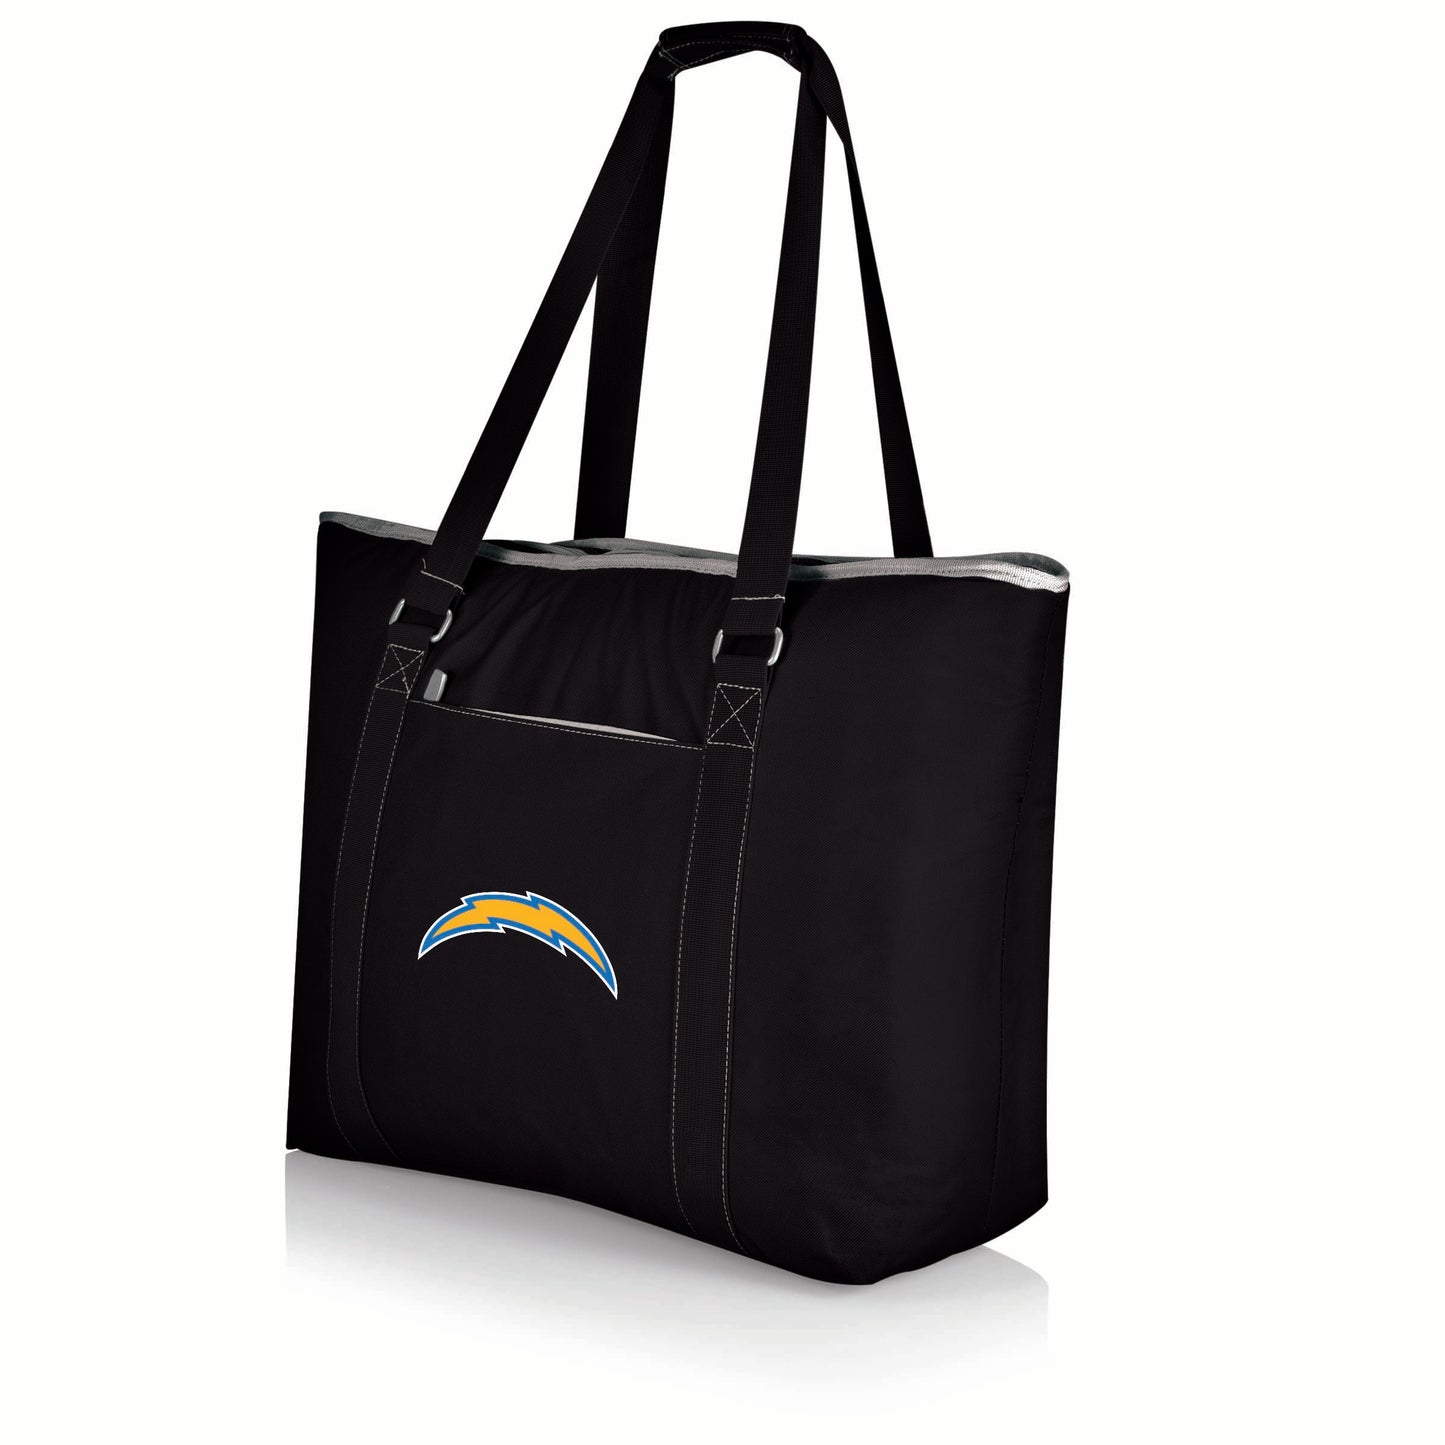 Los Angeles Chargers - Tahoe XL Cooler Tote Bag